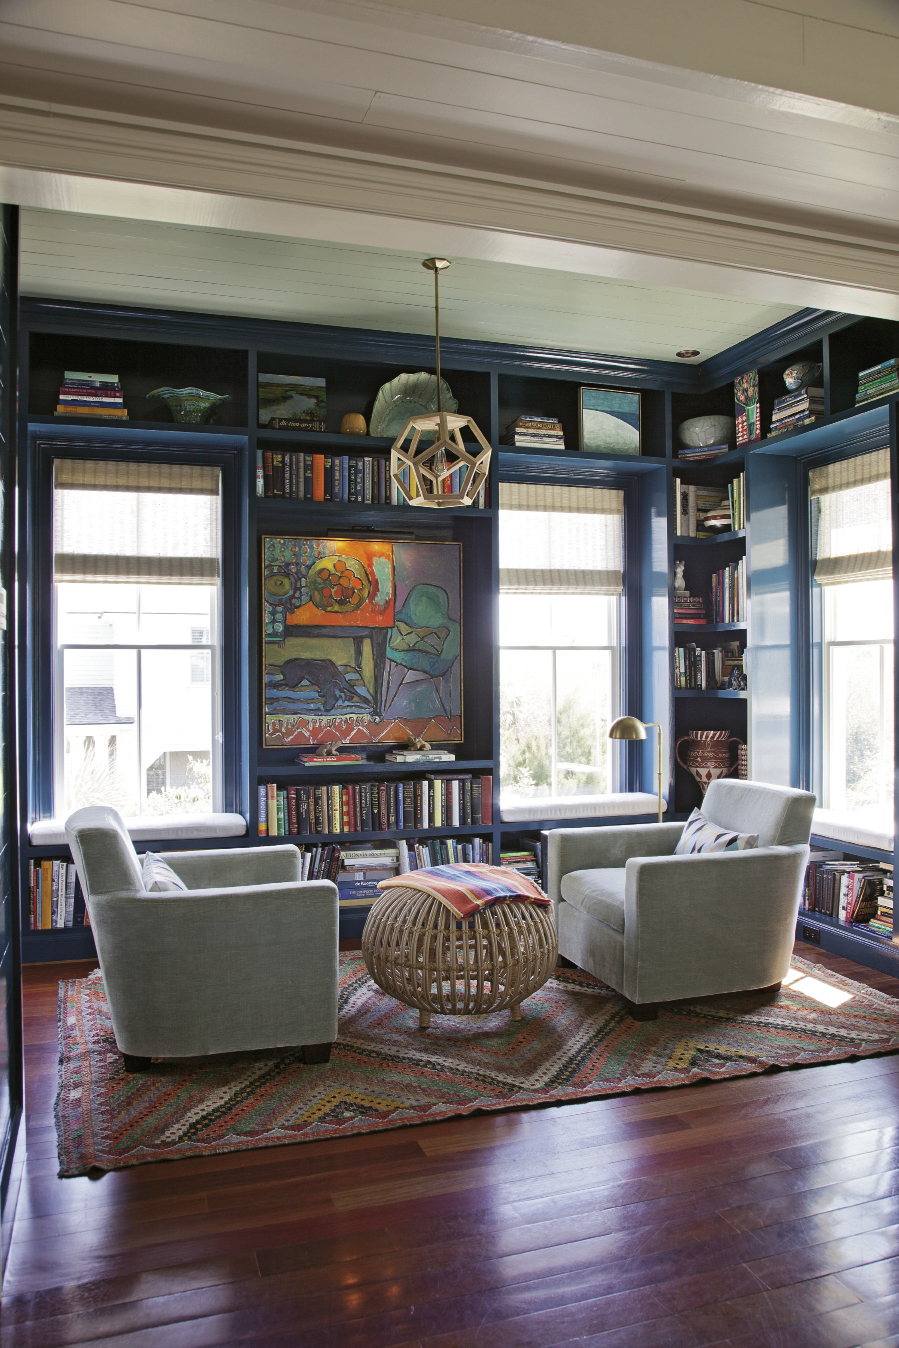 In this cozy reading nook off the kitchen, Bishop designed the built-in shelves, which were  constructed by area builder James Meadors. She also choose the paint color, a shade of blue that matches the deep waters of the sea.